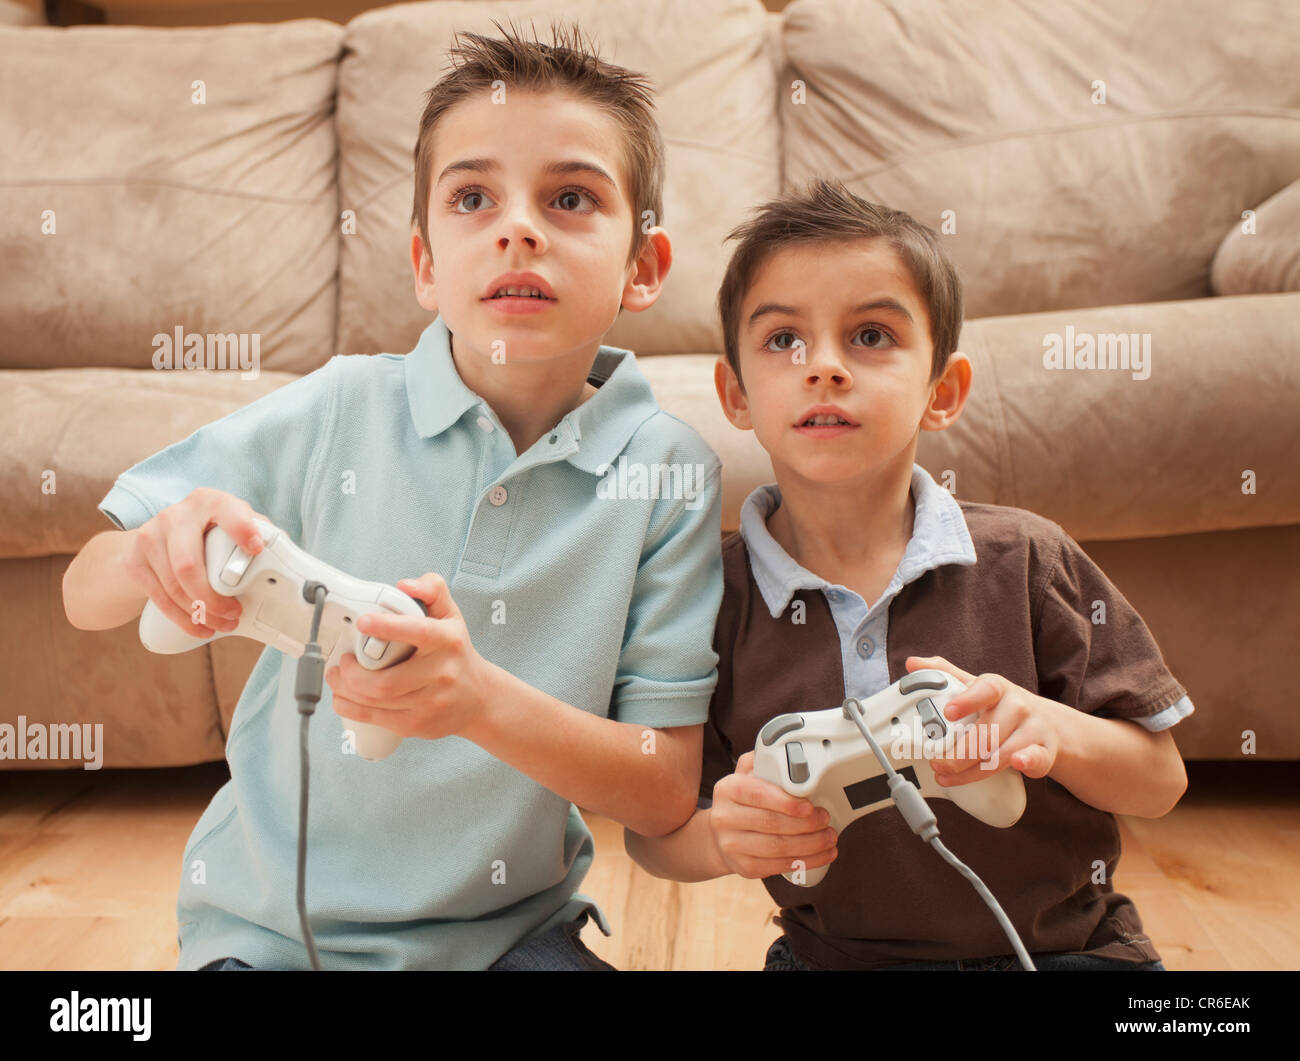 boys and video games